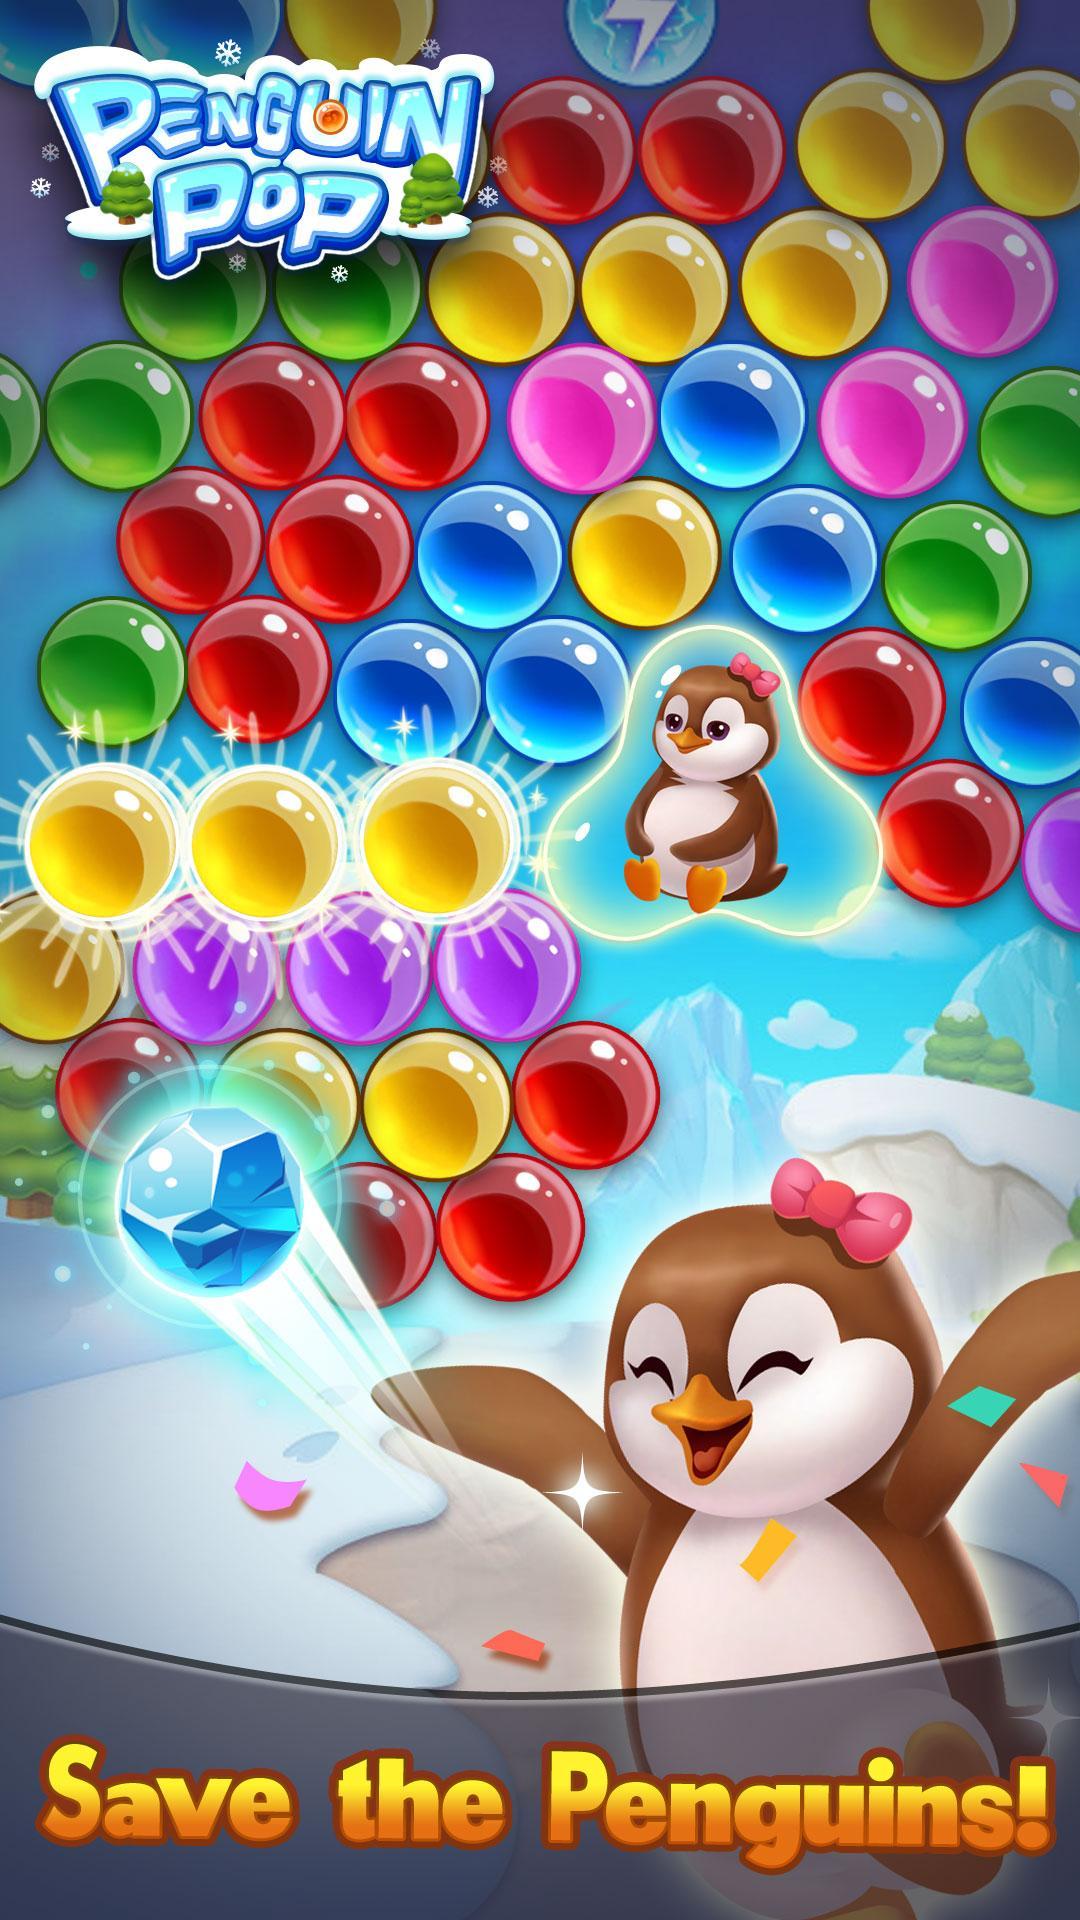 Penguin Pop for Android - APK Download